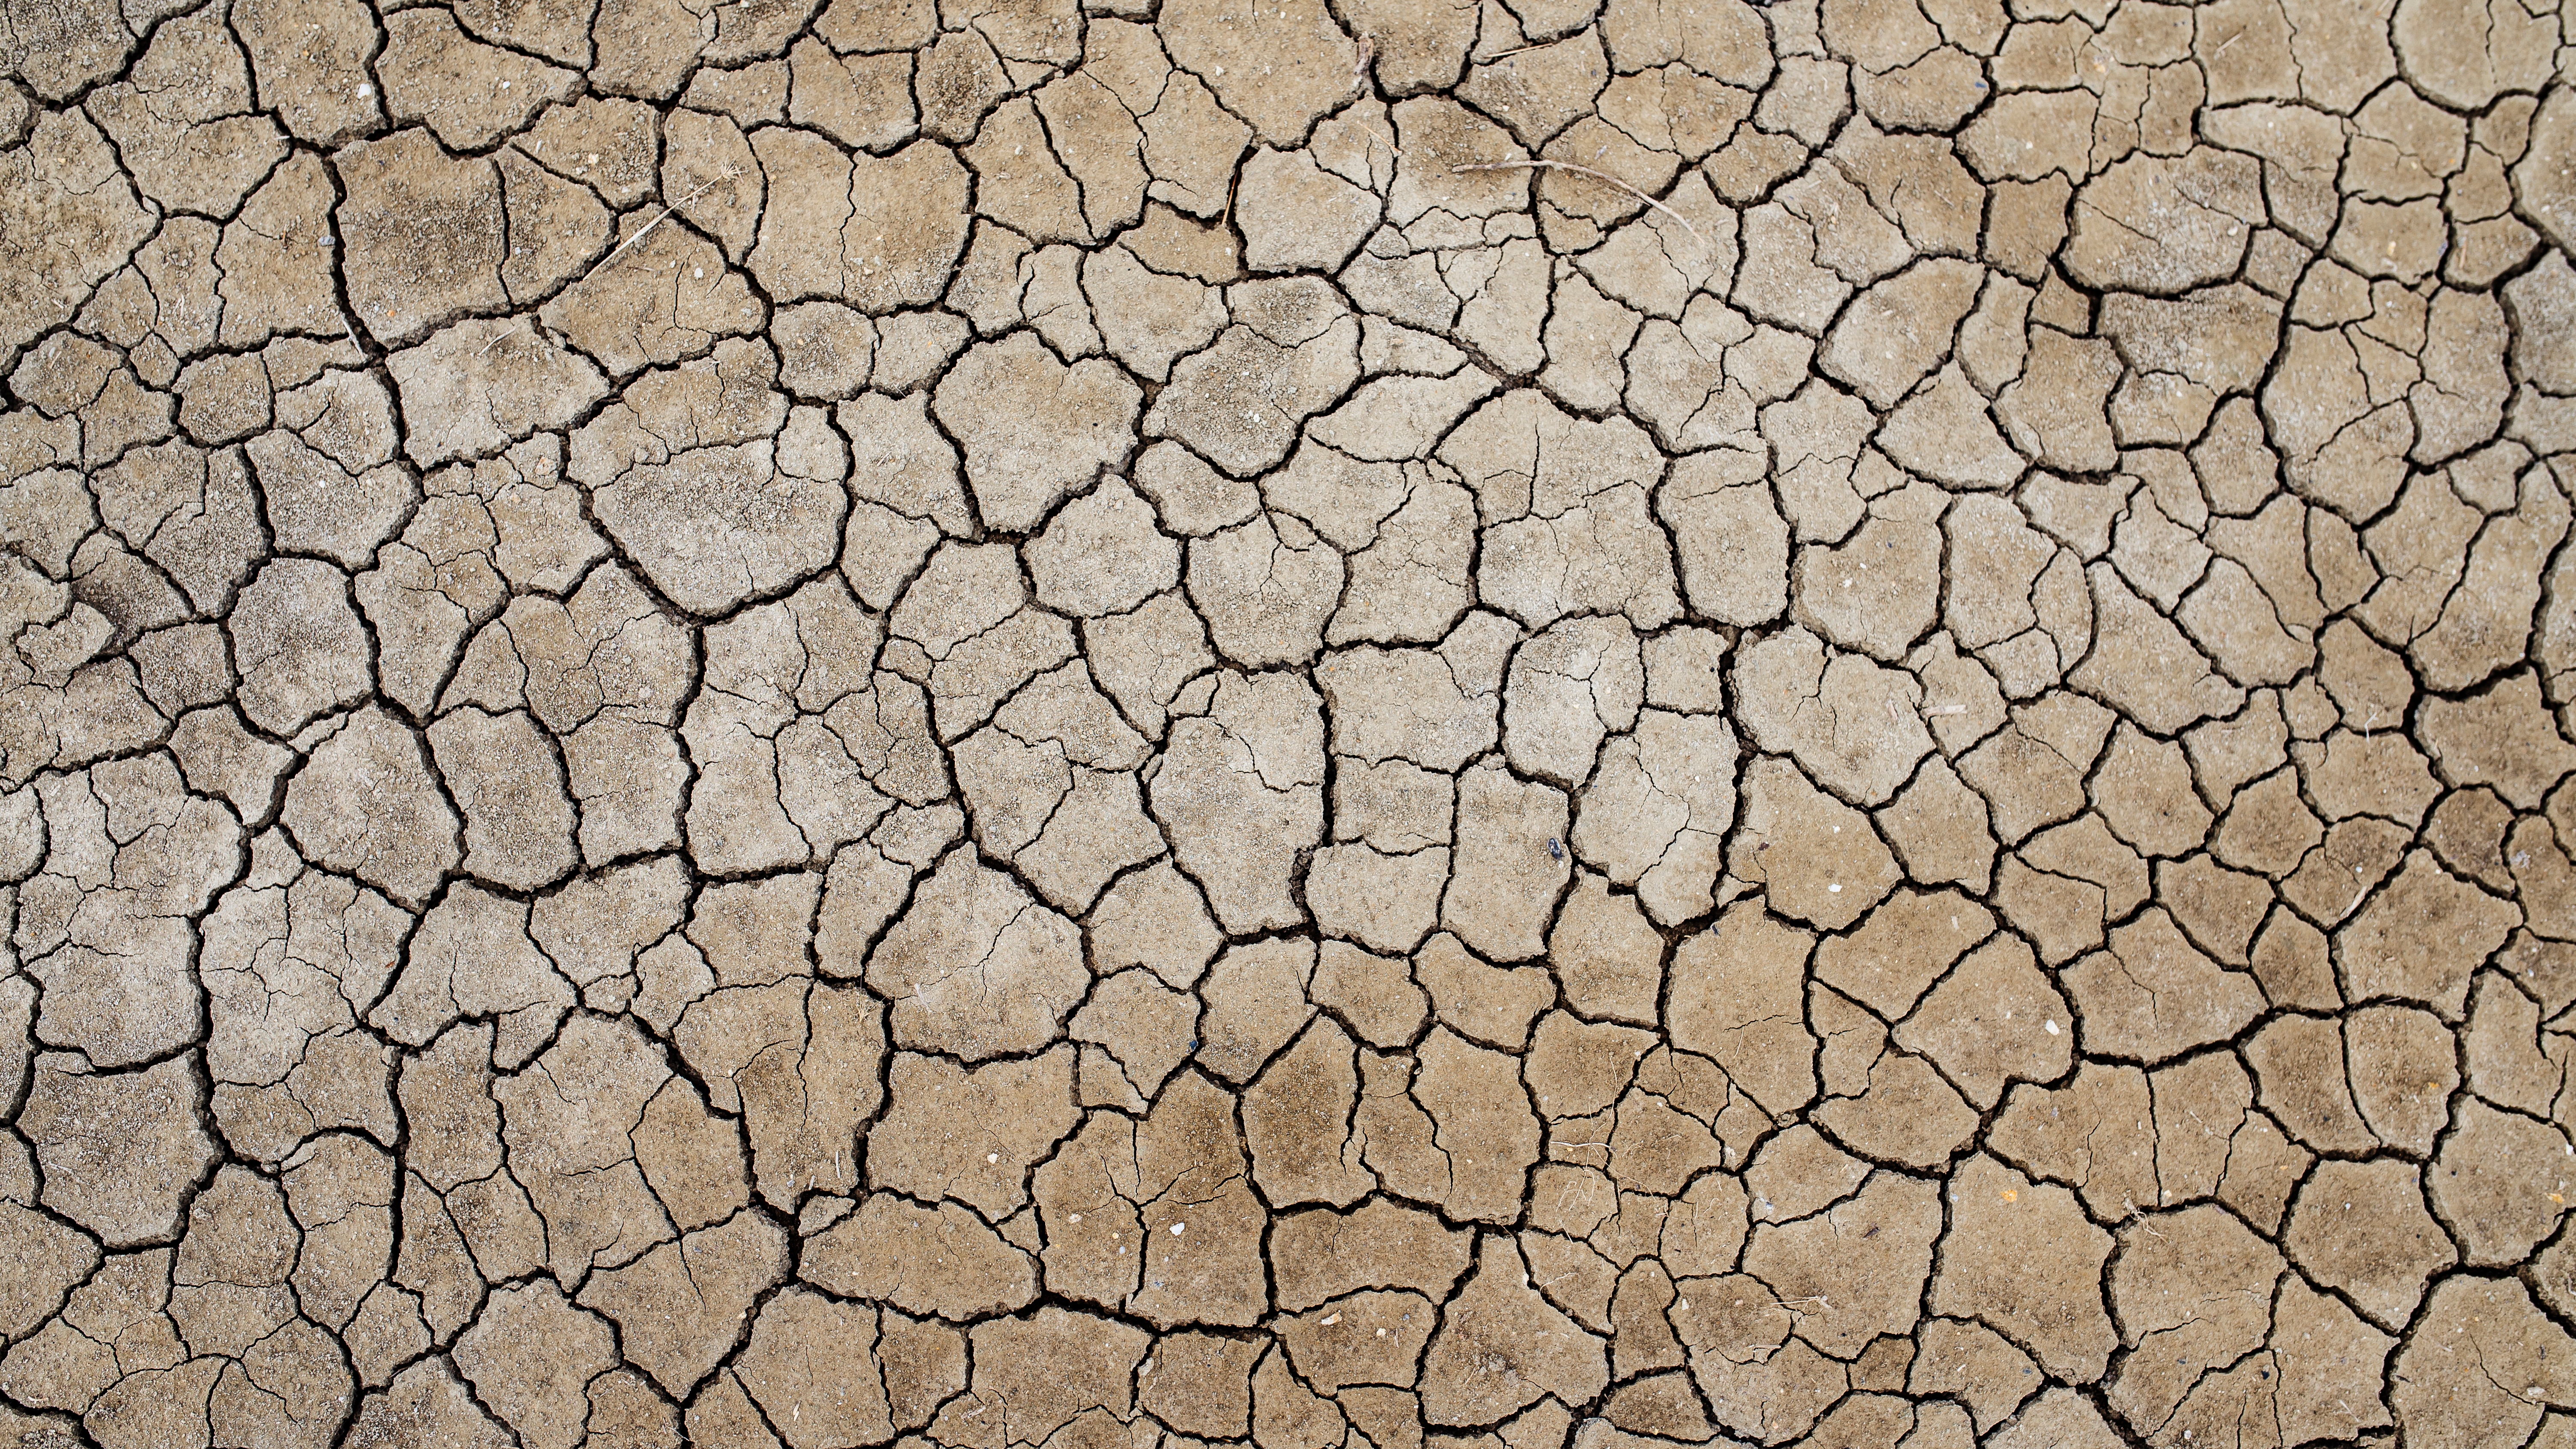 dry ground climate change